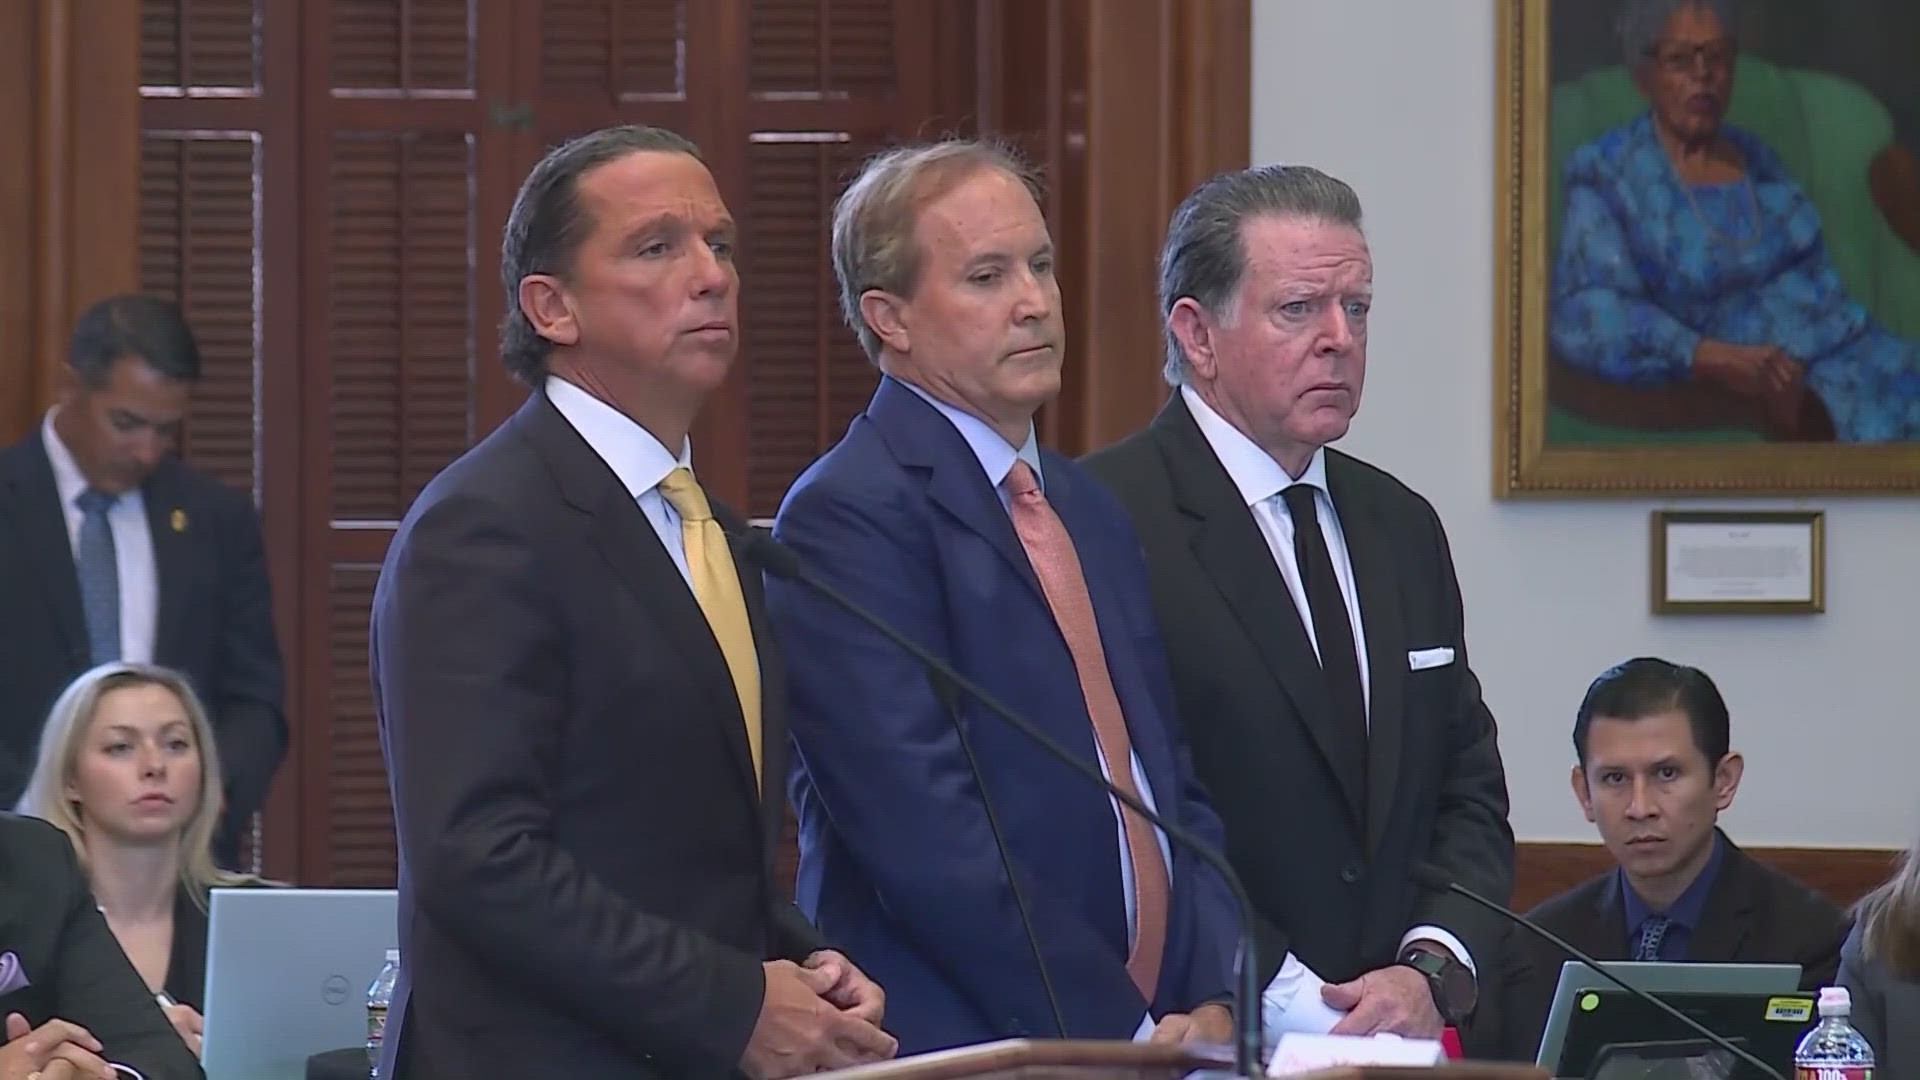 Opening arguments were underway today for the Paxton impeachment trial.